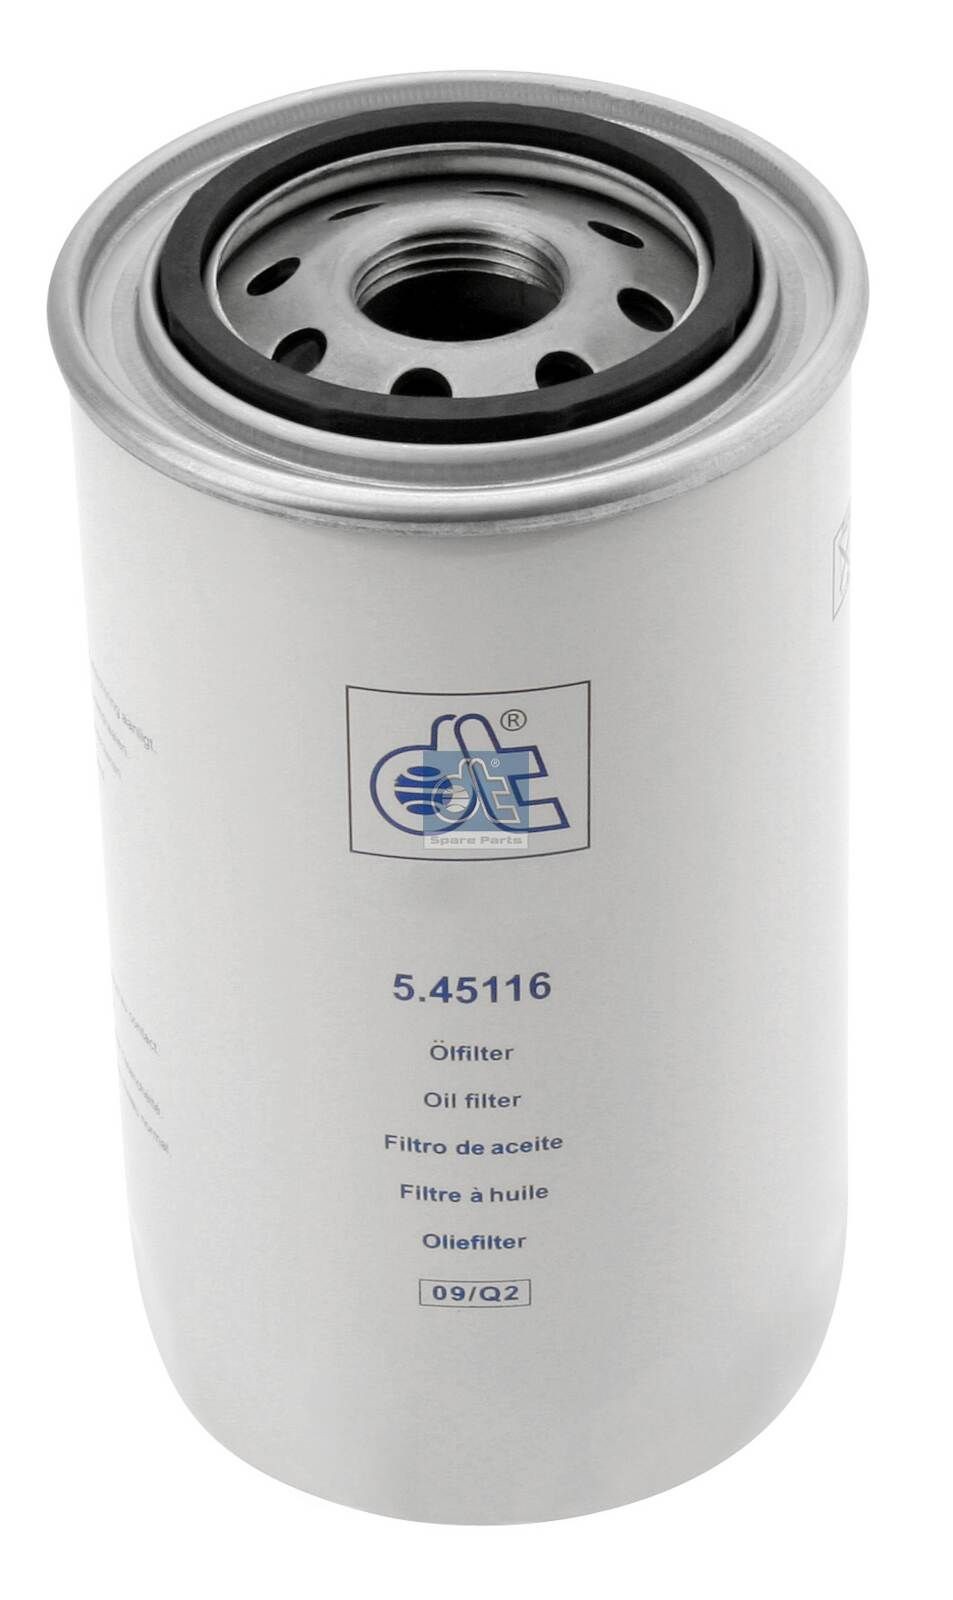 H19W10 DT Spare Parts 5.45116 Oil filter LF1601500